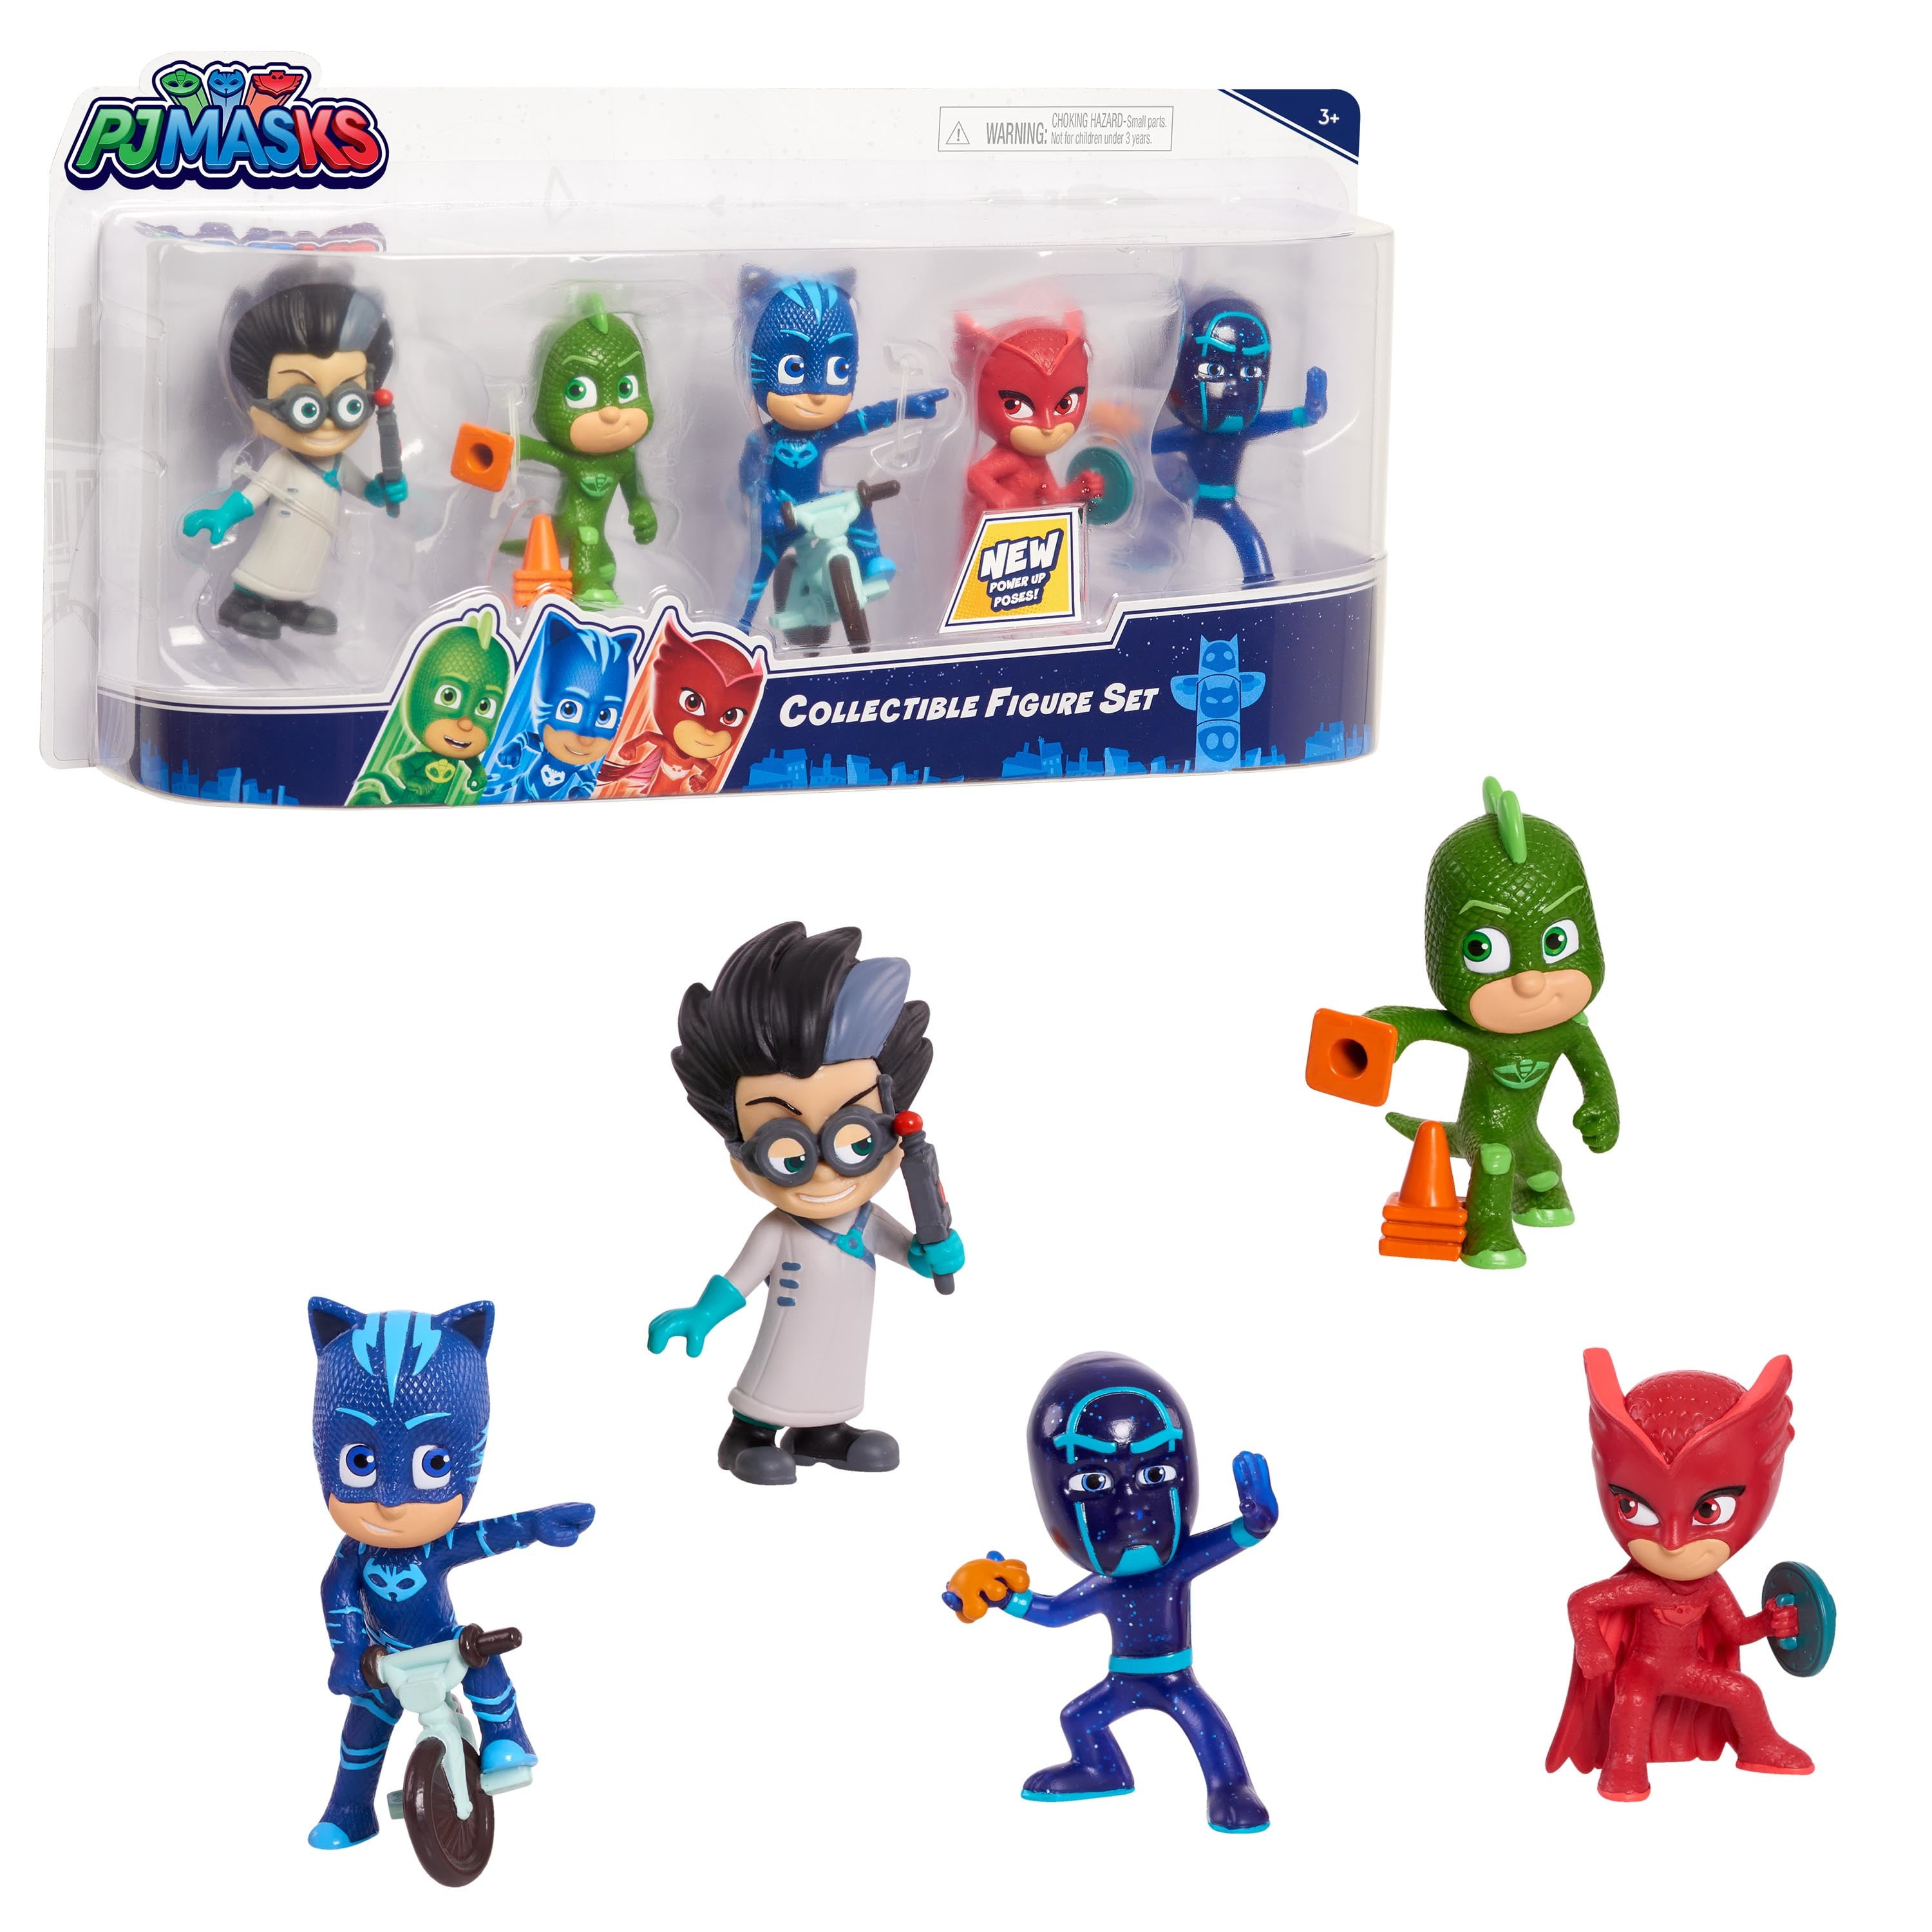 Ready For Action PJ Masks Catboy Gekko Owlette Toddler Mini 10 inches backpack 